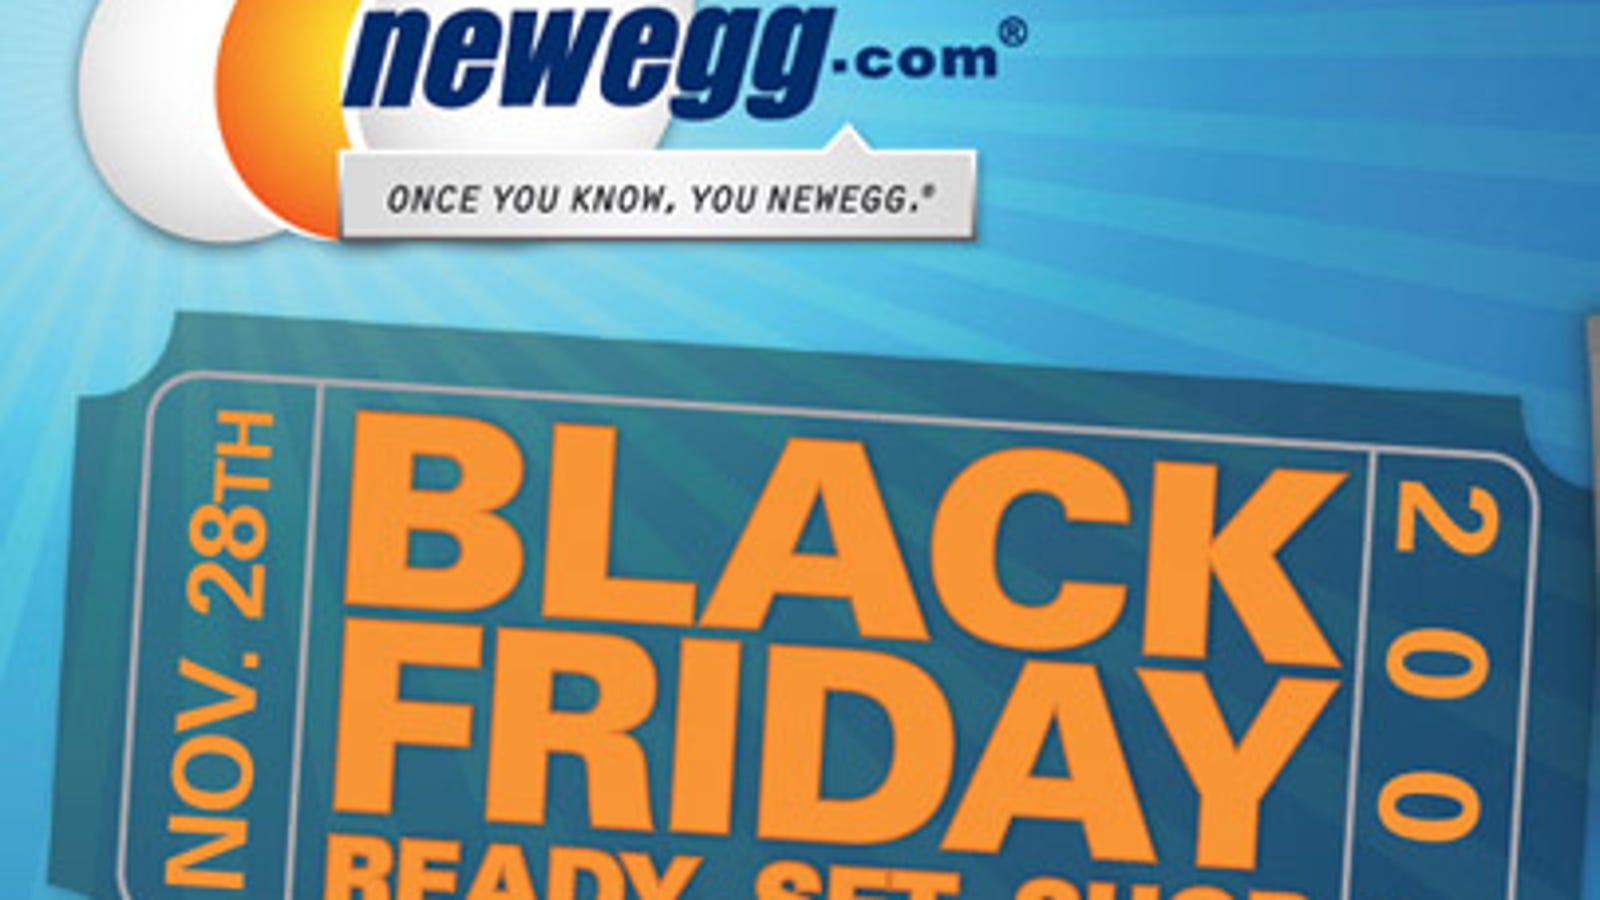 Newegg's Black Friday Deals Unveiled - How Long Is Neweggs Black Friday Deala